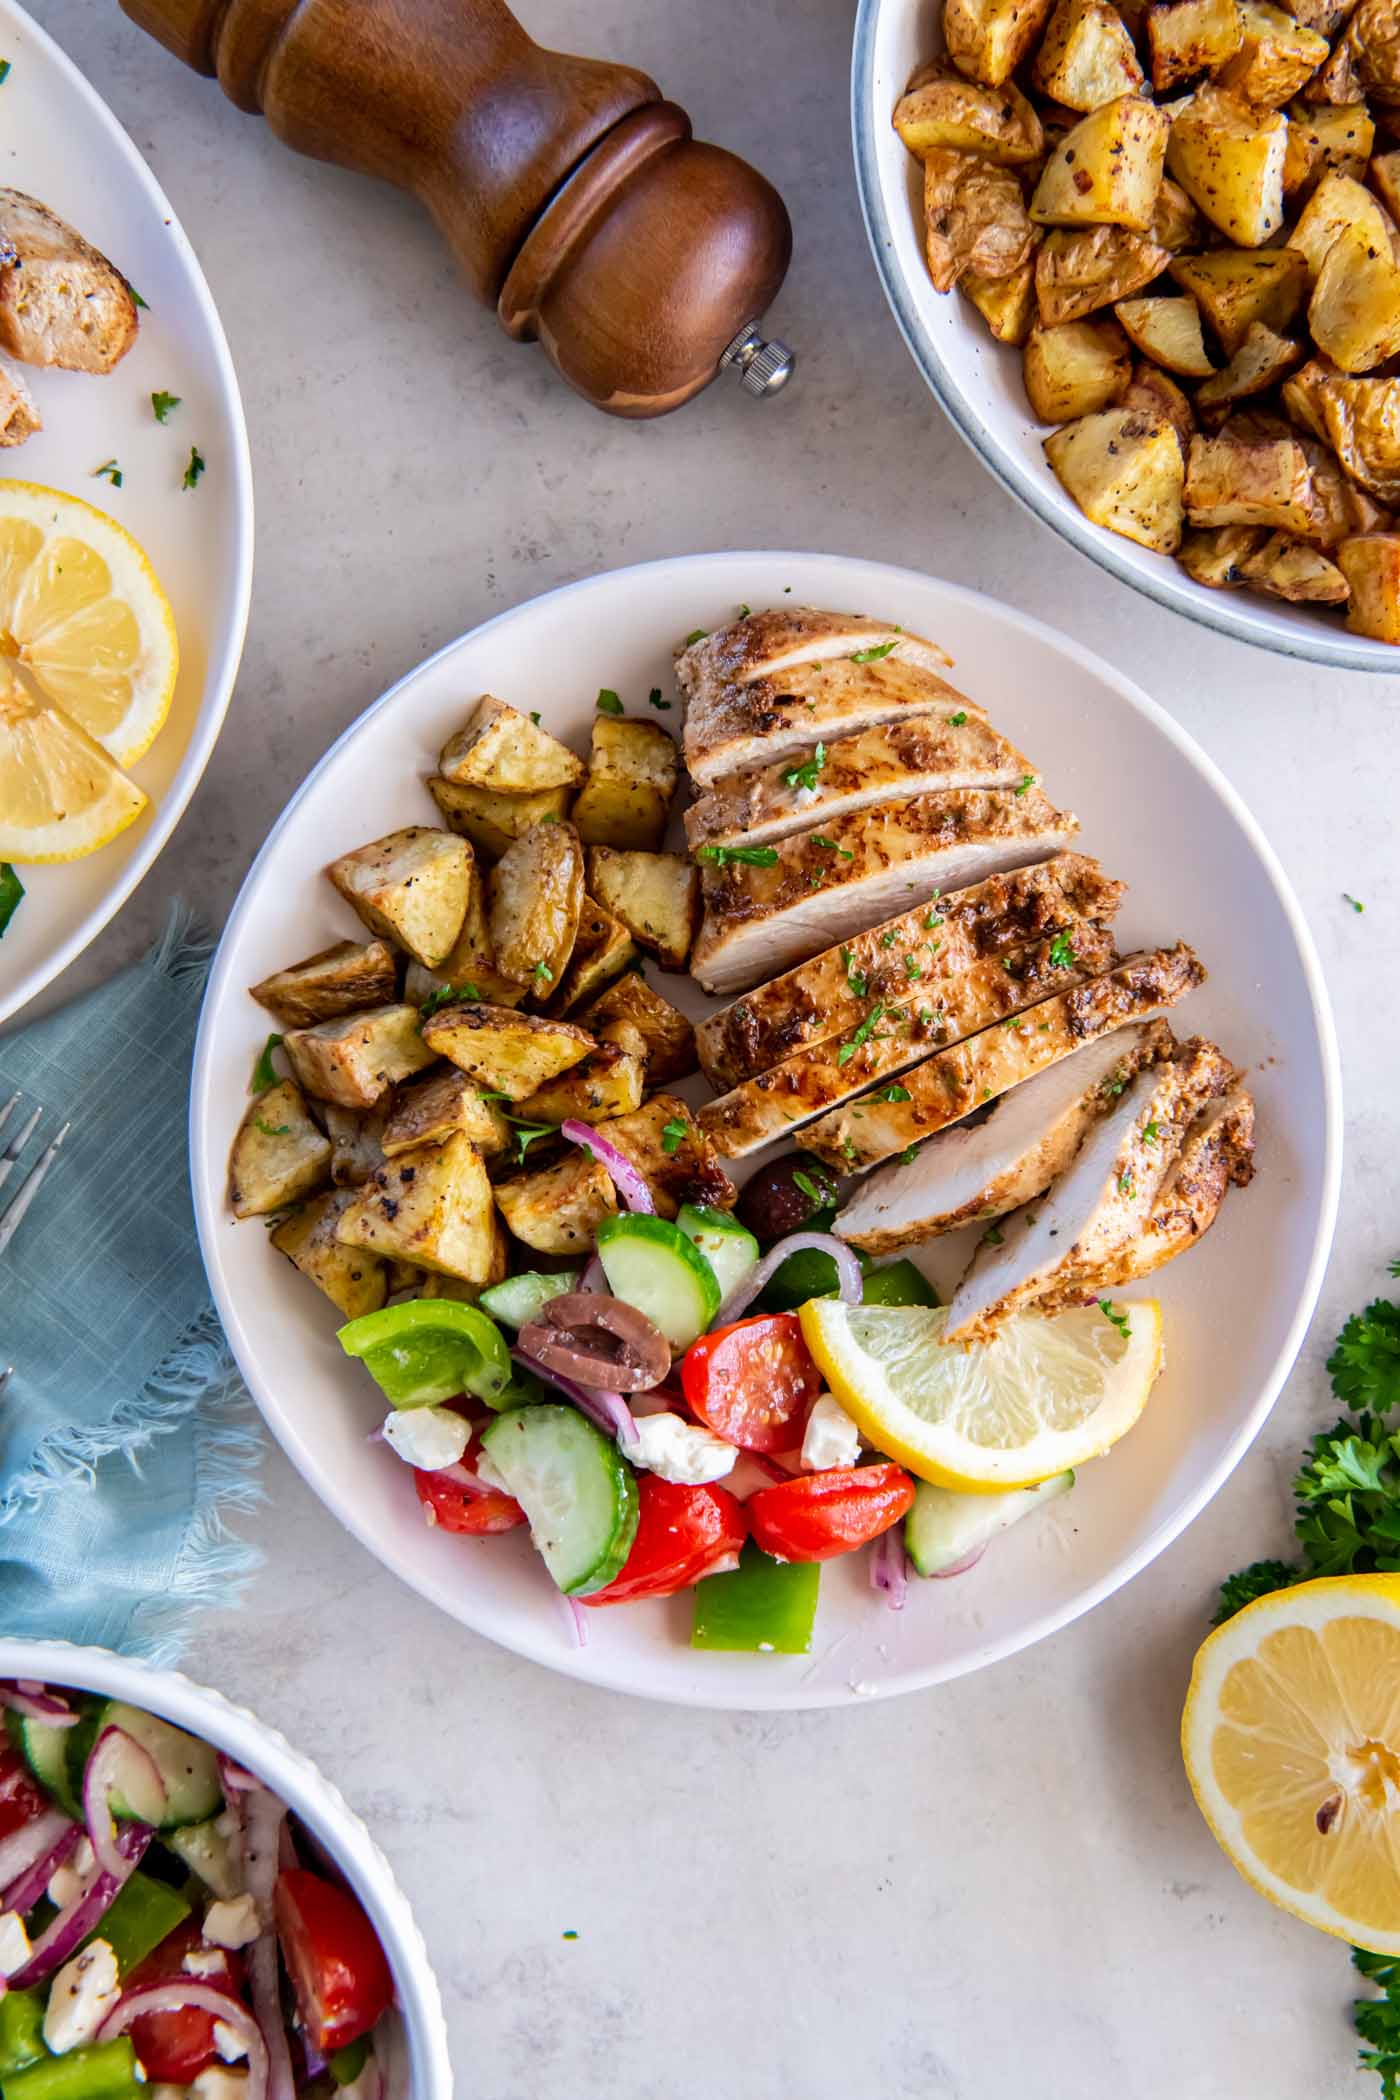 Greek chicken served with roasted potatoes and a Greek salad.